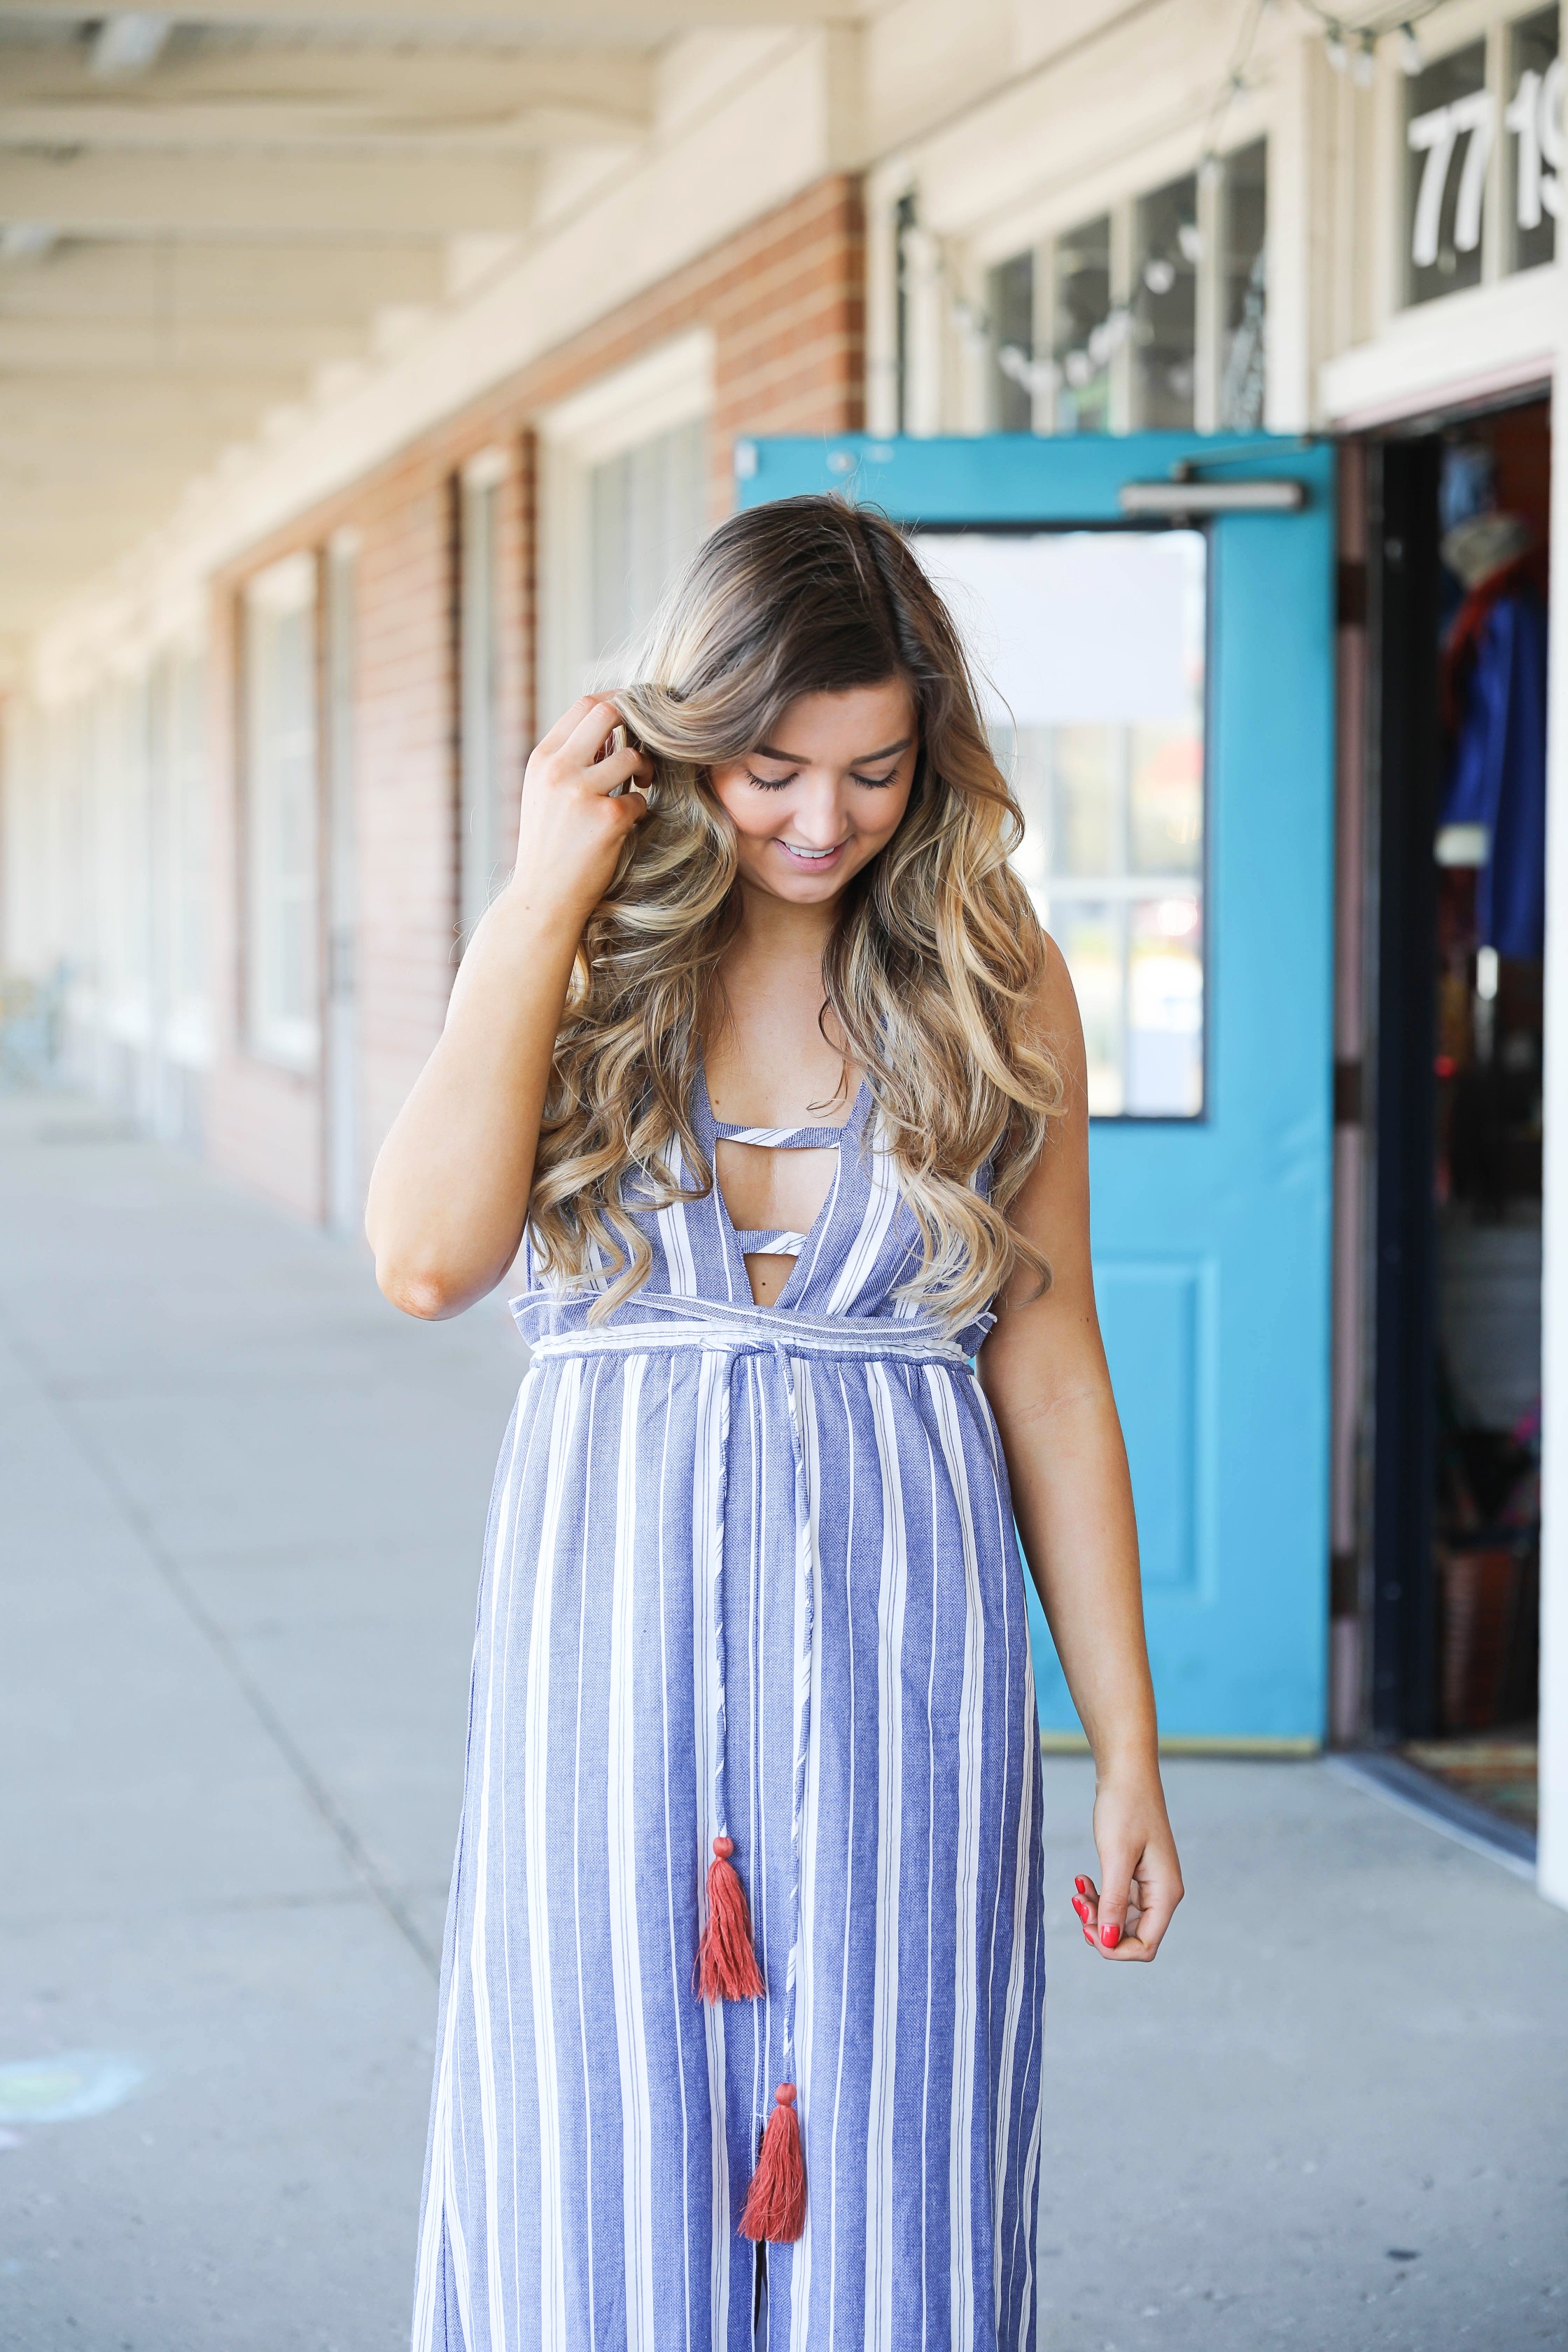 How cute is this Nautical Striped Tassel Dress? I have been loving dresses for spring and summer and this one is one of my favorites! Perfect for boating or days by the beach. By Lauren Lindmark on daily dose of charm dailydoseofcharm.com